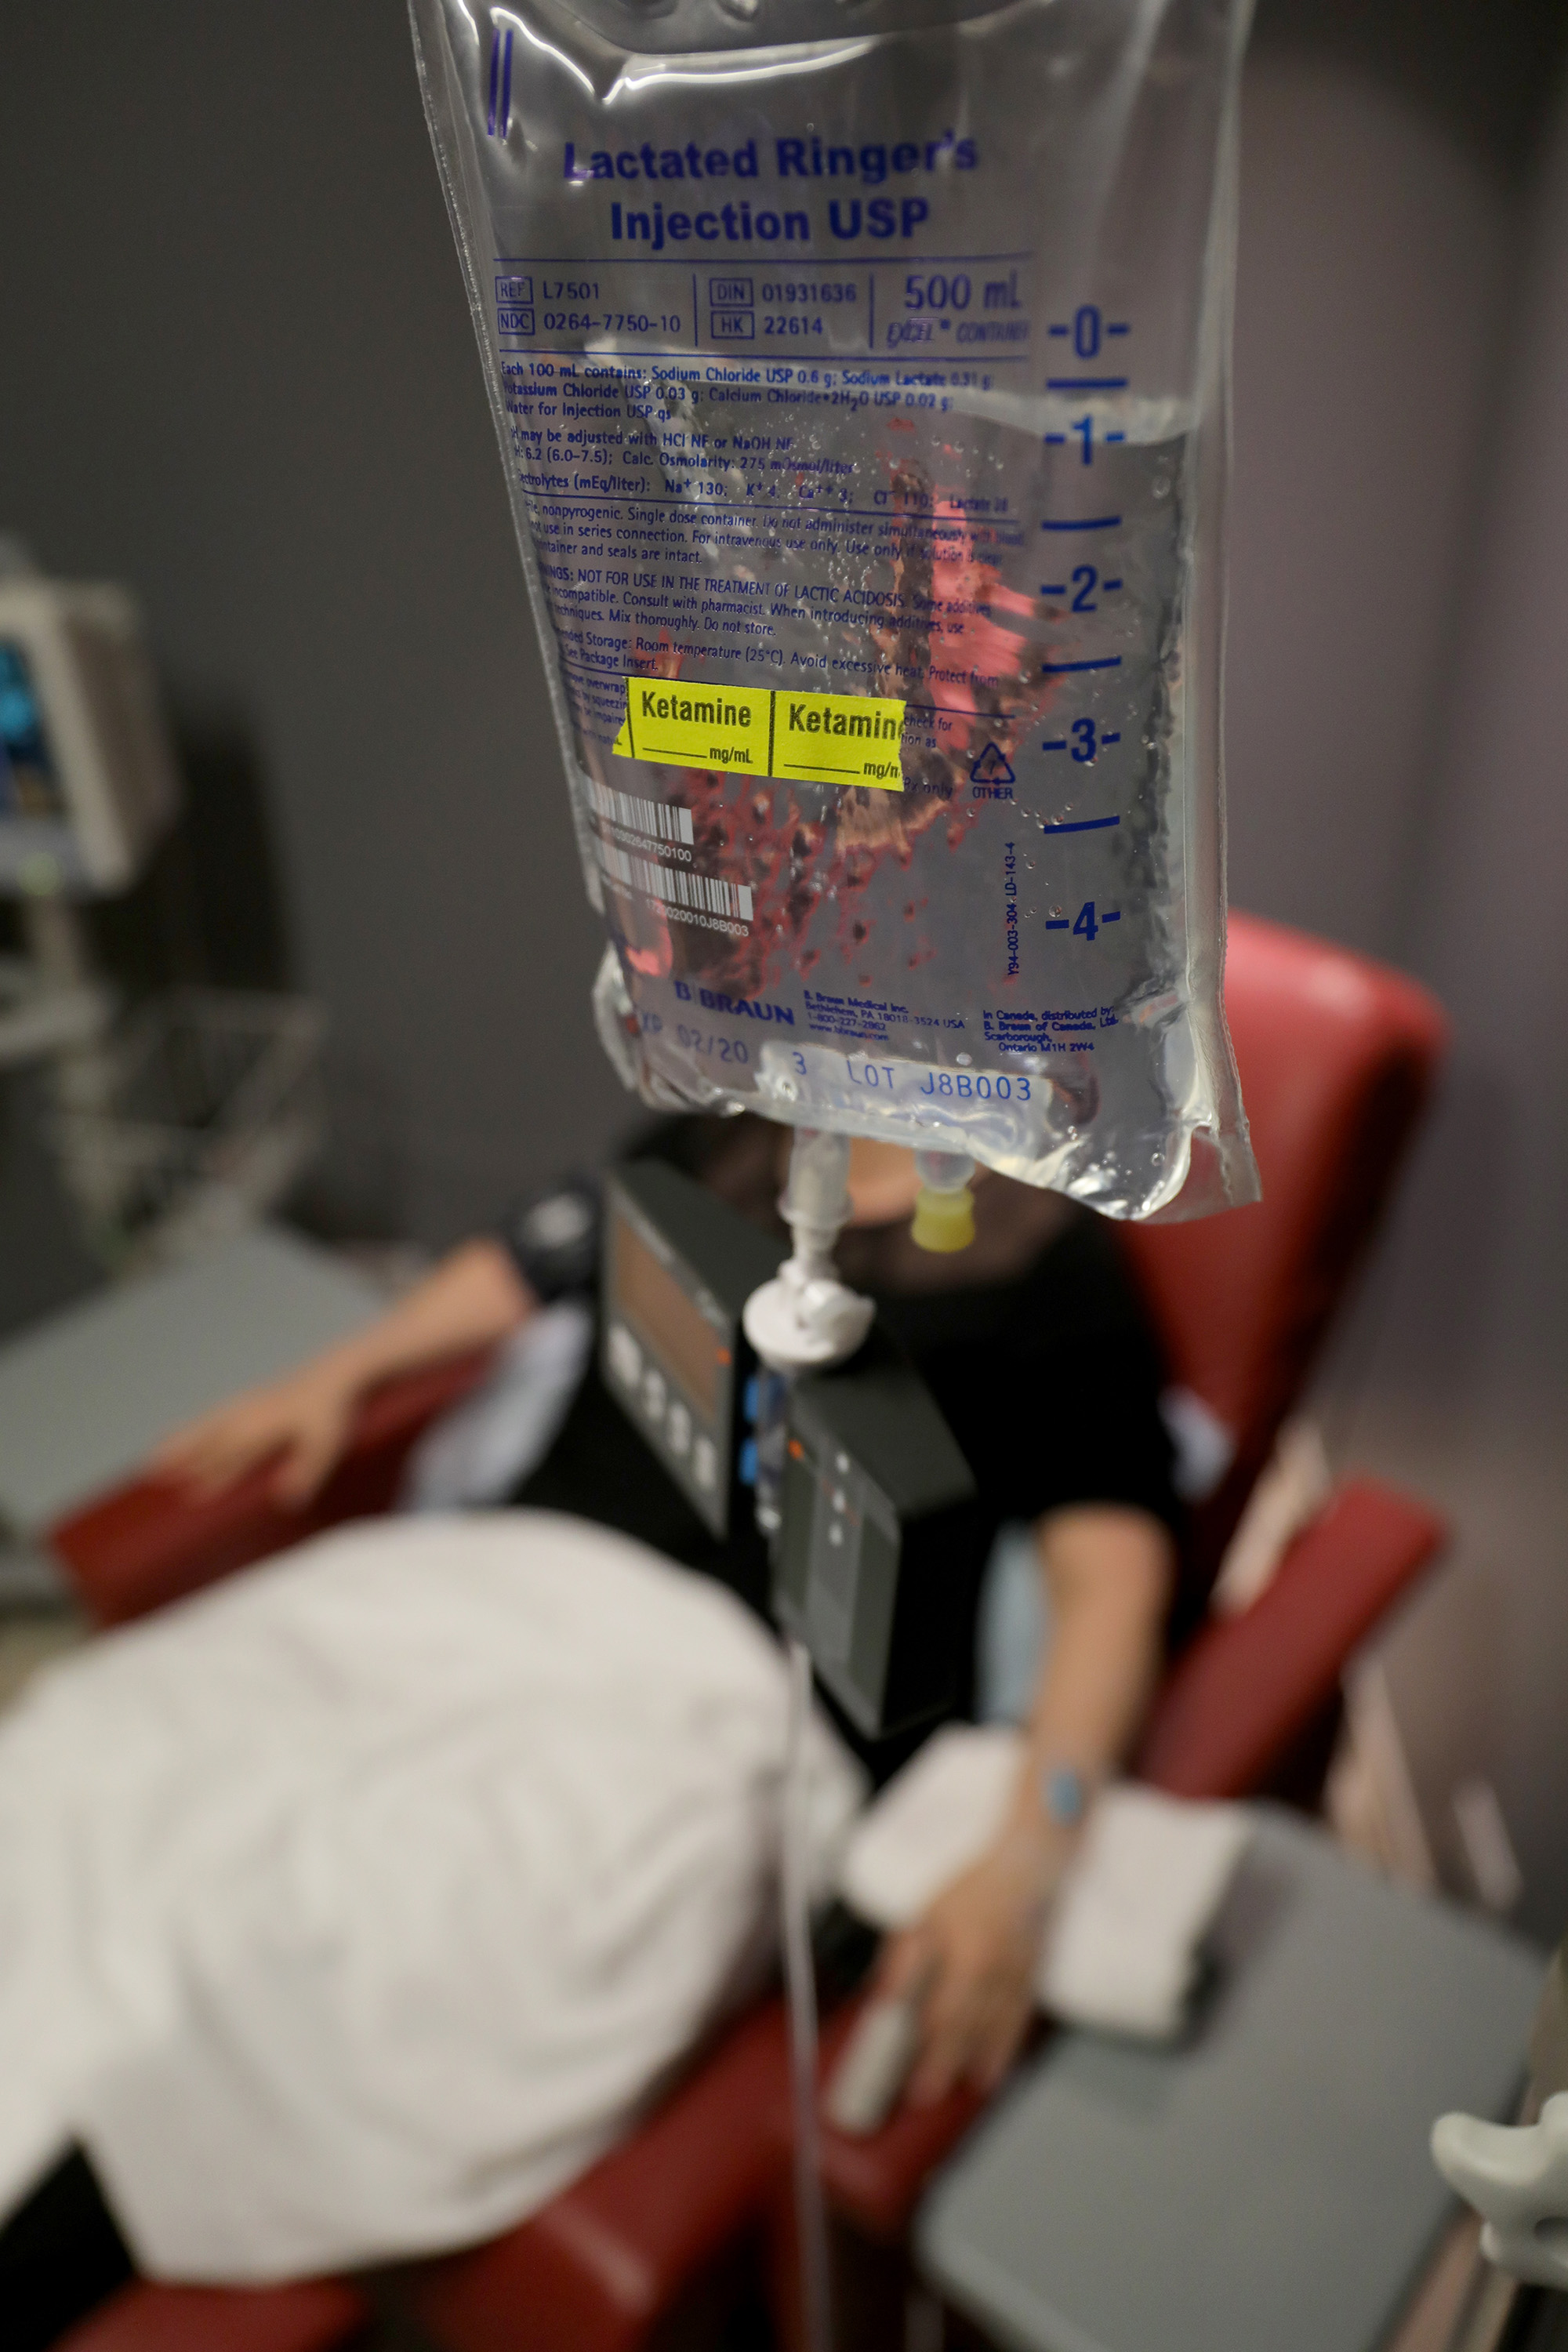 A patient has Ketamine administered by way of an  IV bag for the treatment of depression at IV Solution in Chicago, Wednesday, March 21, 2018. (Chicago Tribune&mdash;TNS via Getty Images)